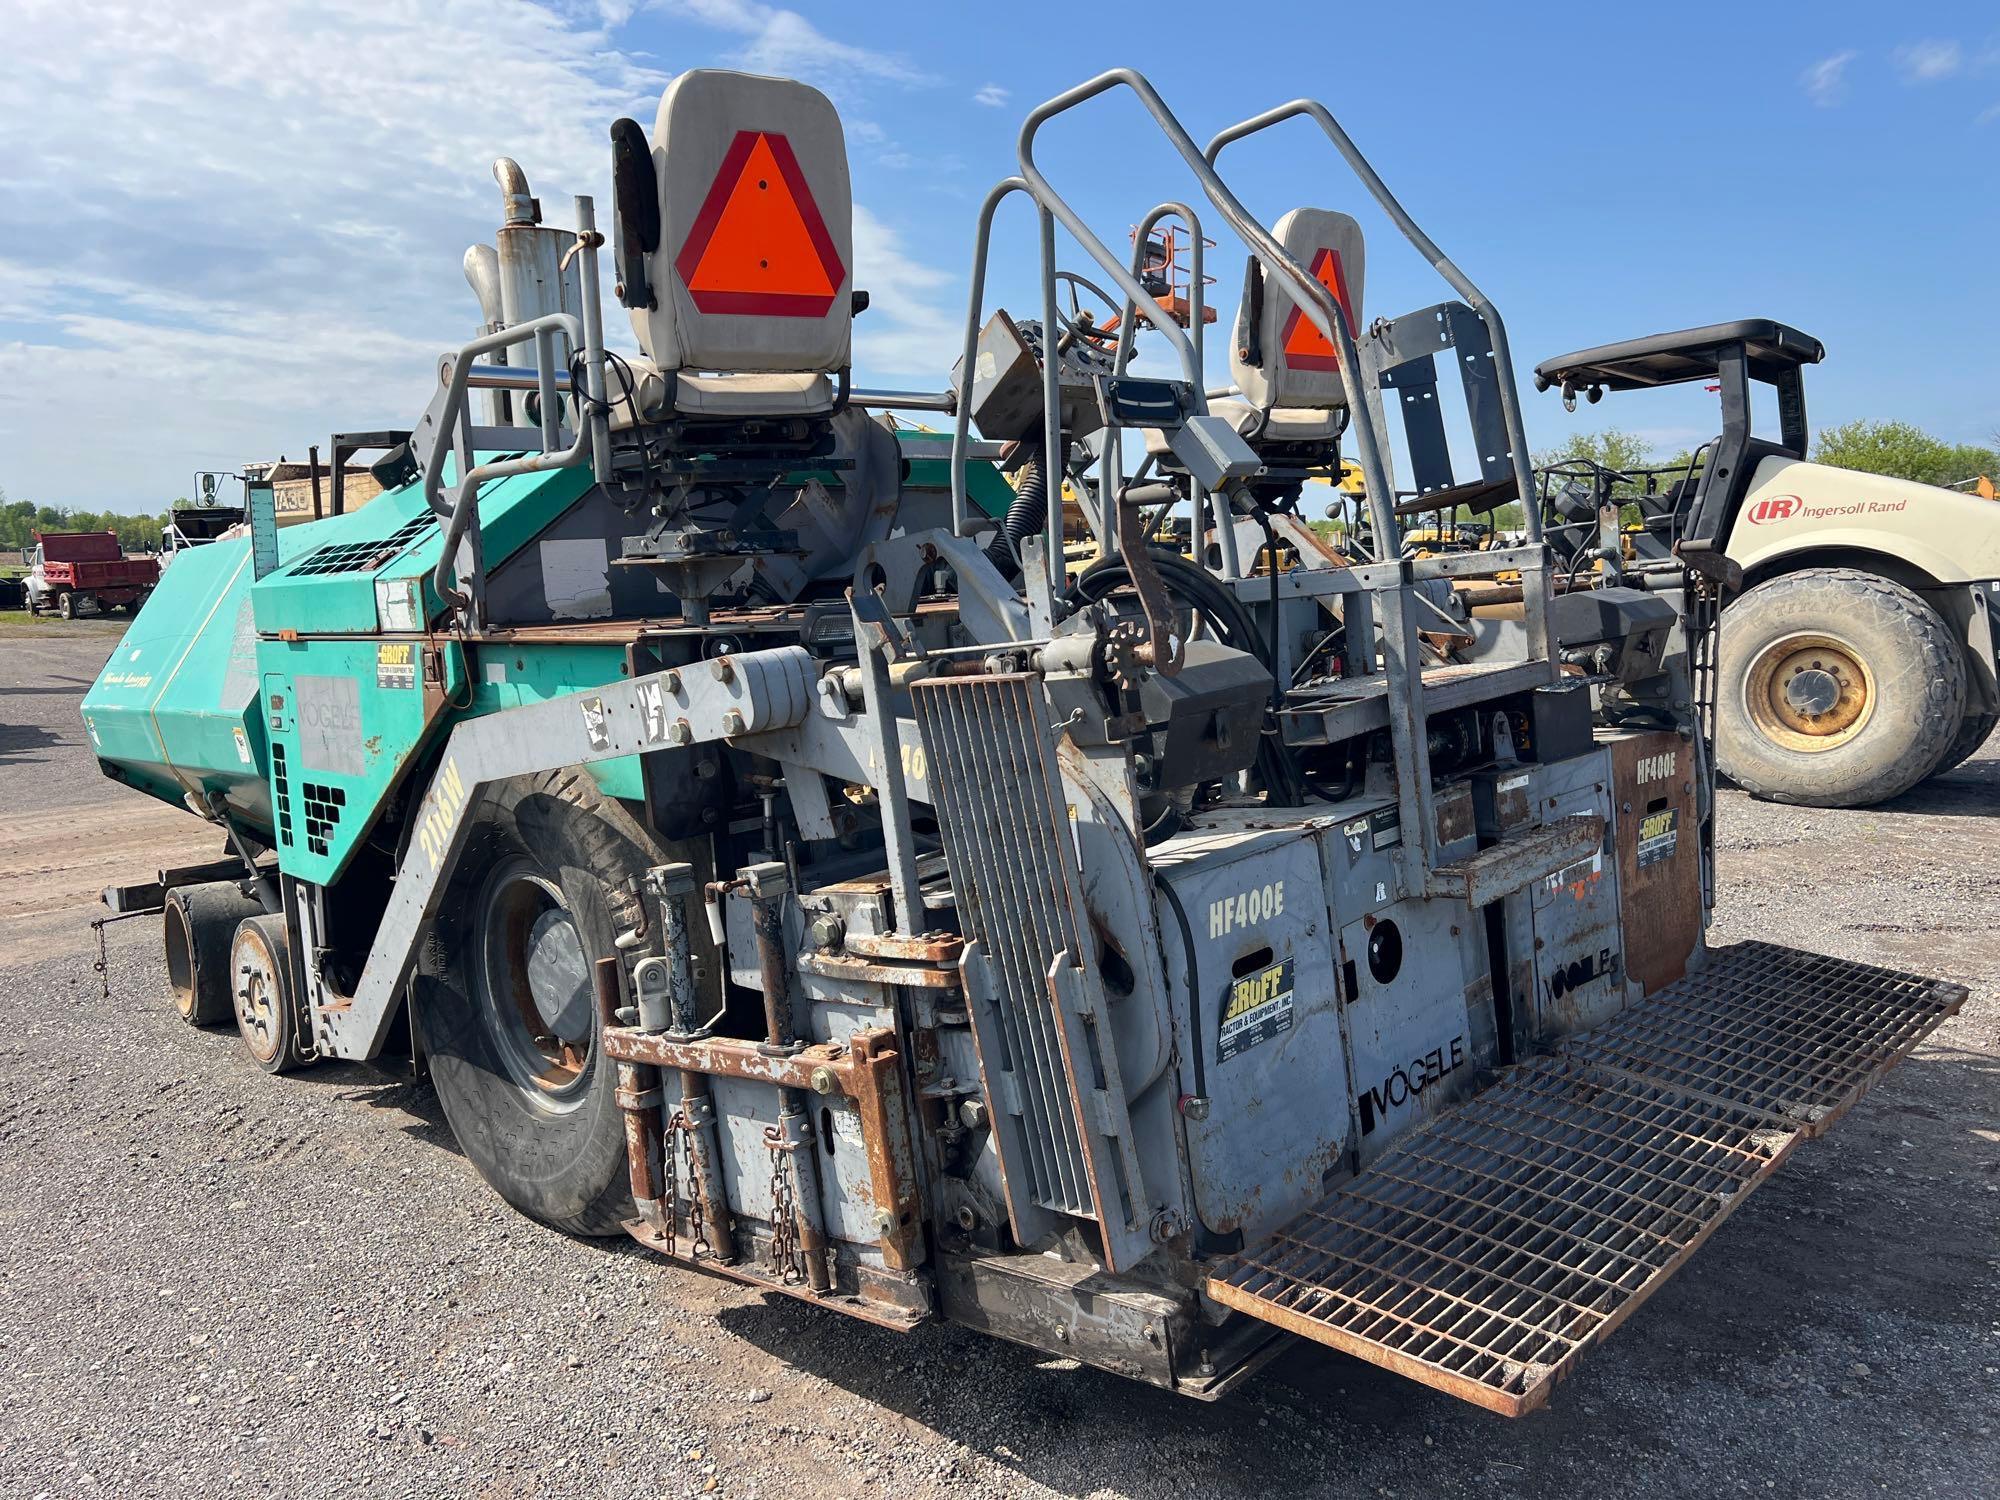 VOGELE HF400E ASPHALT PAVER SN:40607 powered by diesel engine, equipped with 8ft. Paver.